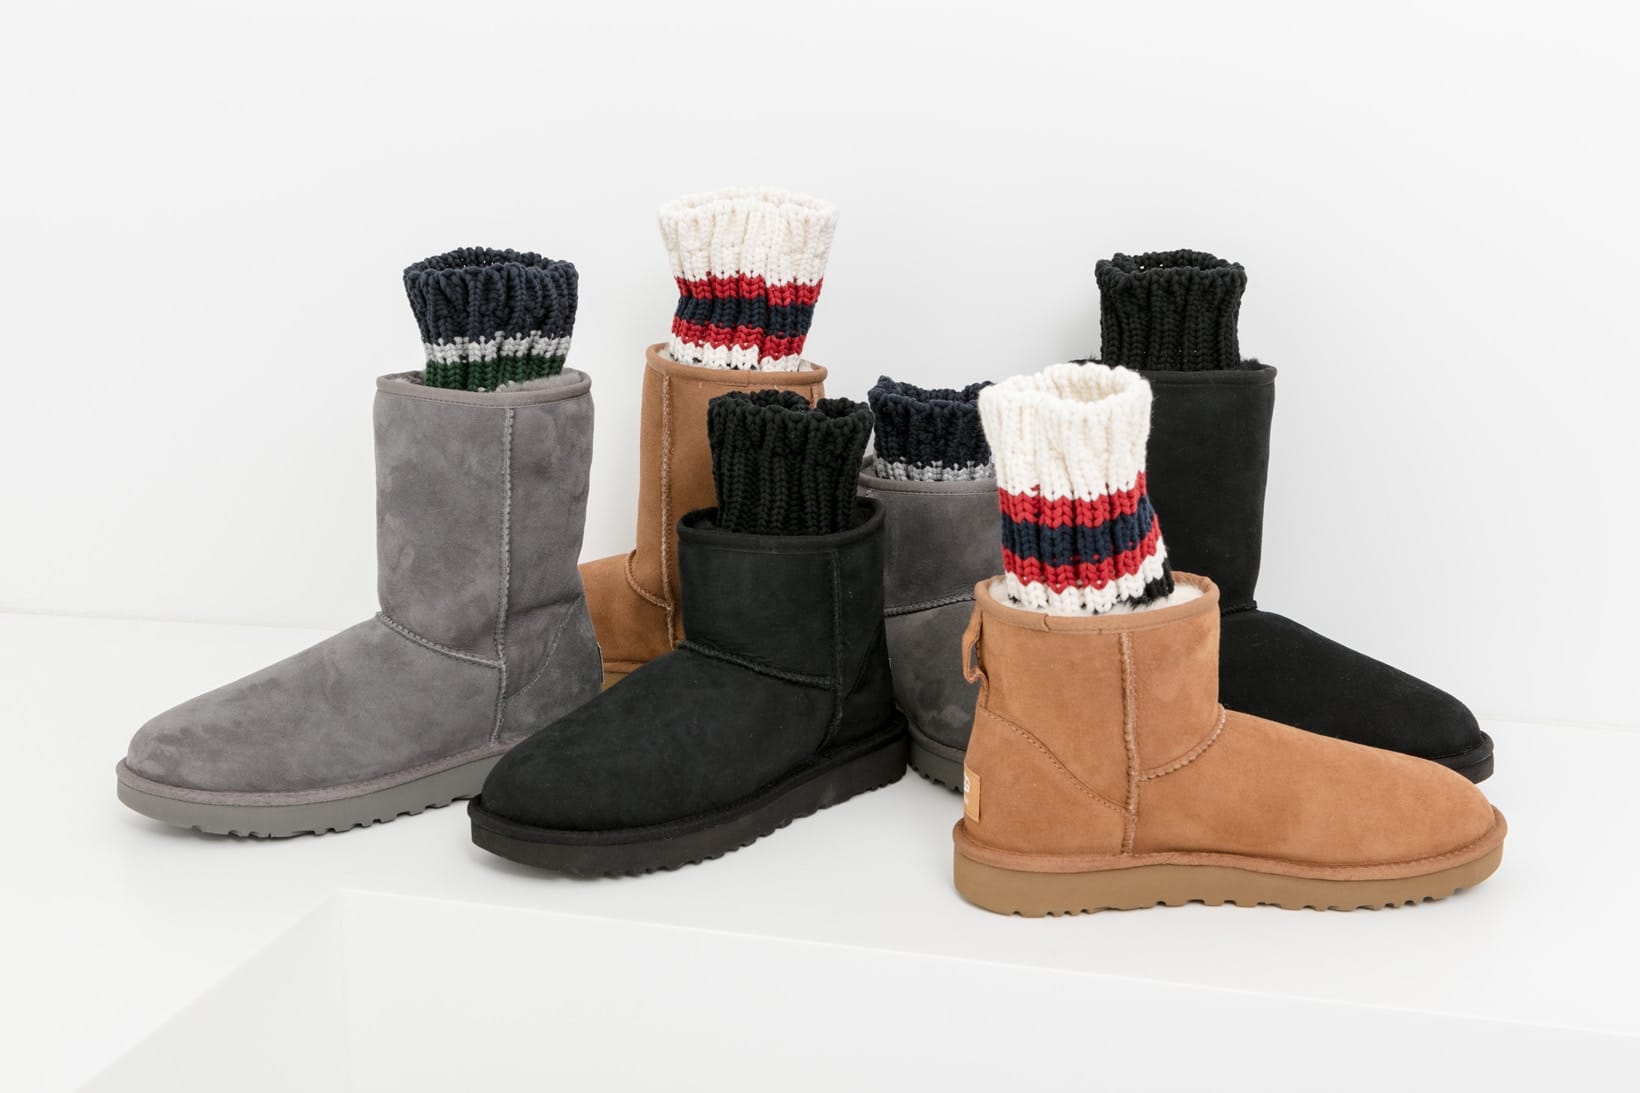 ugg boots 2018 trend